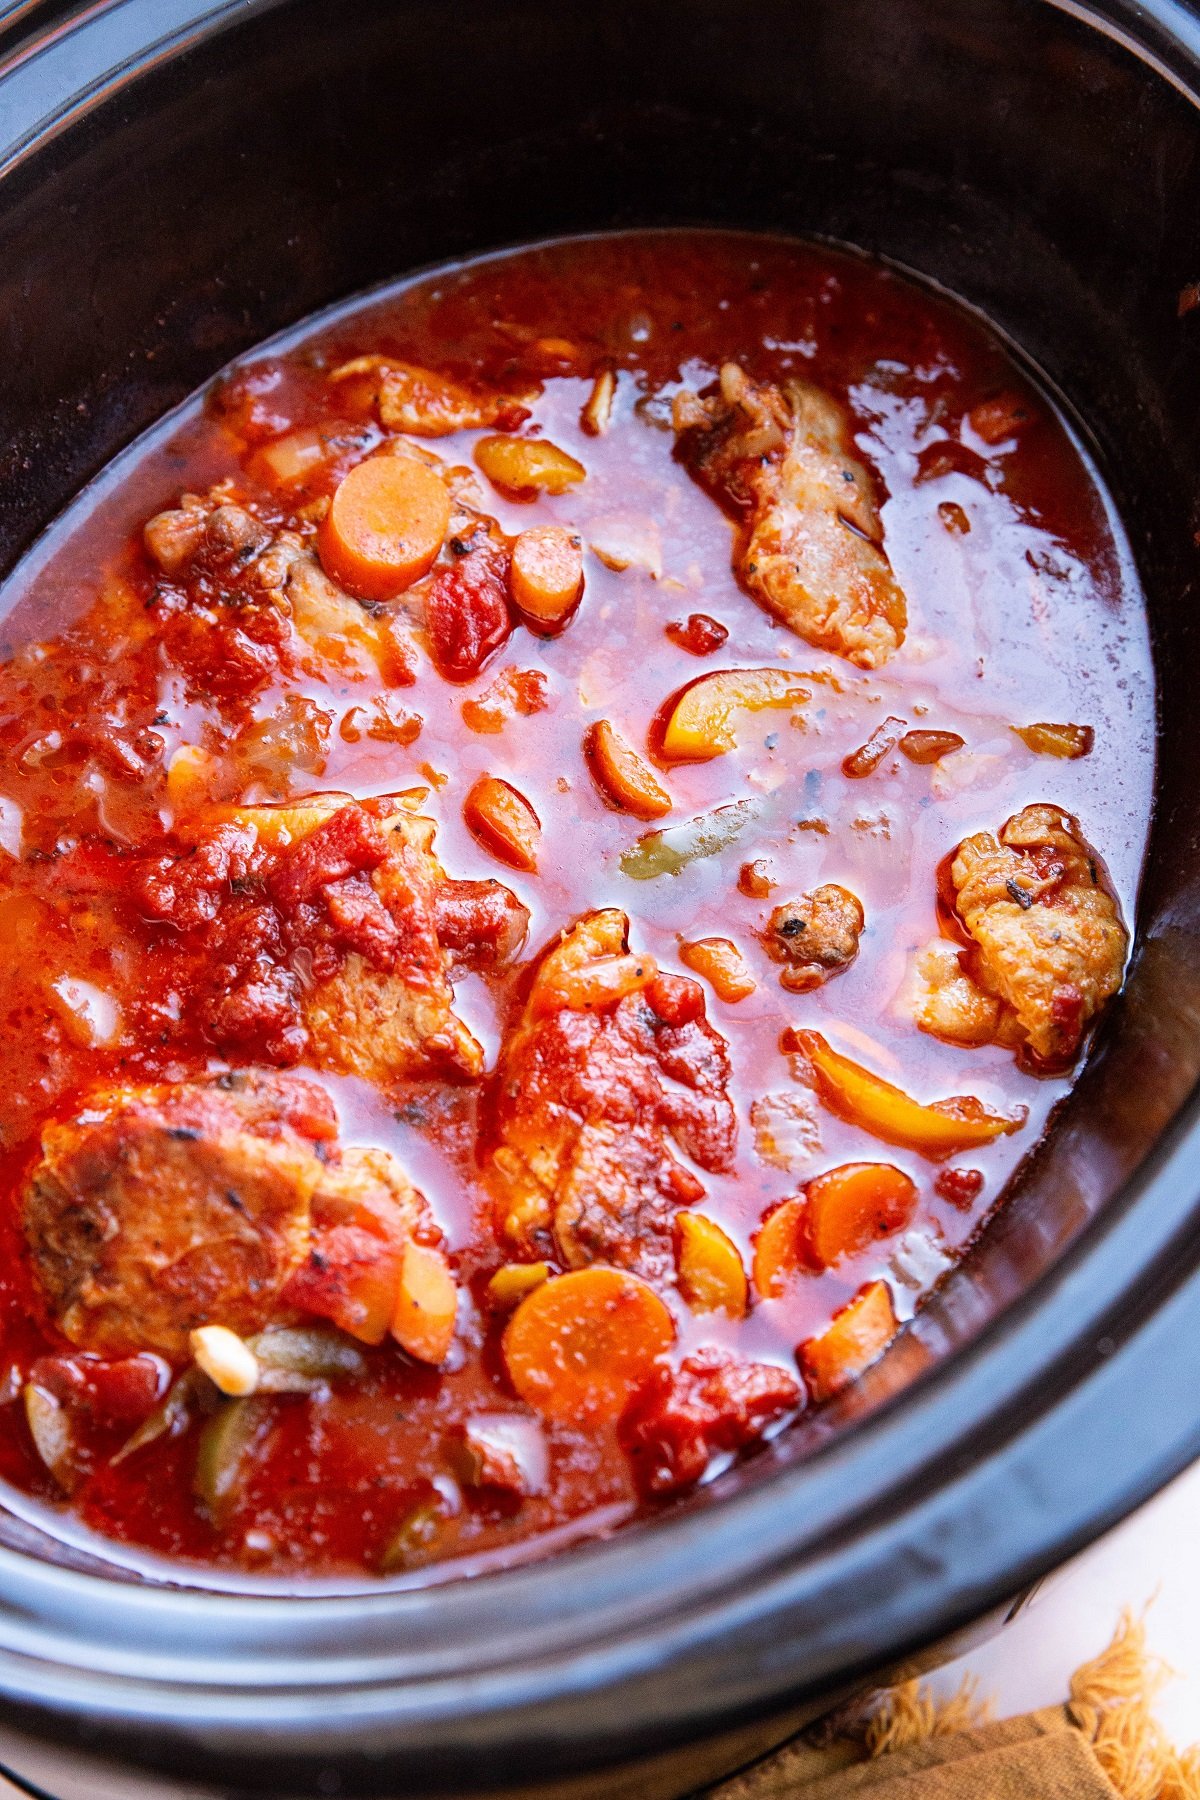 Crock pot full of cooked chicken cacciatore, ready to serve.